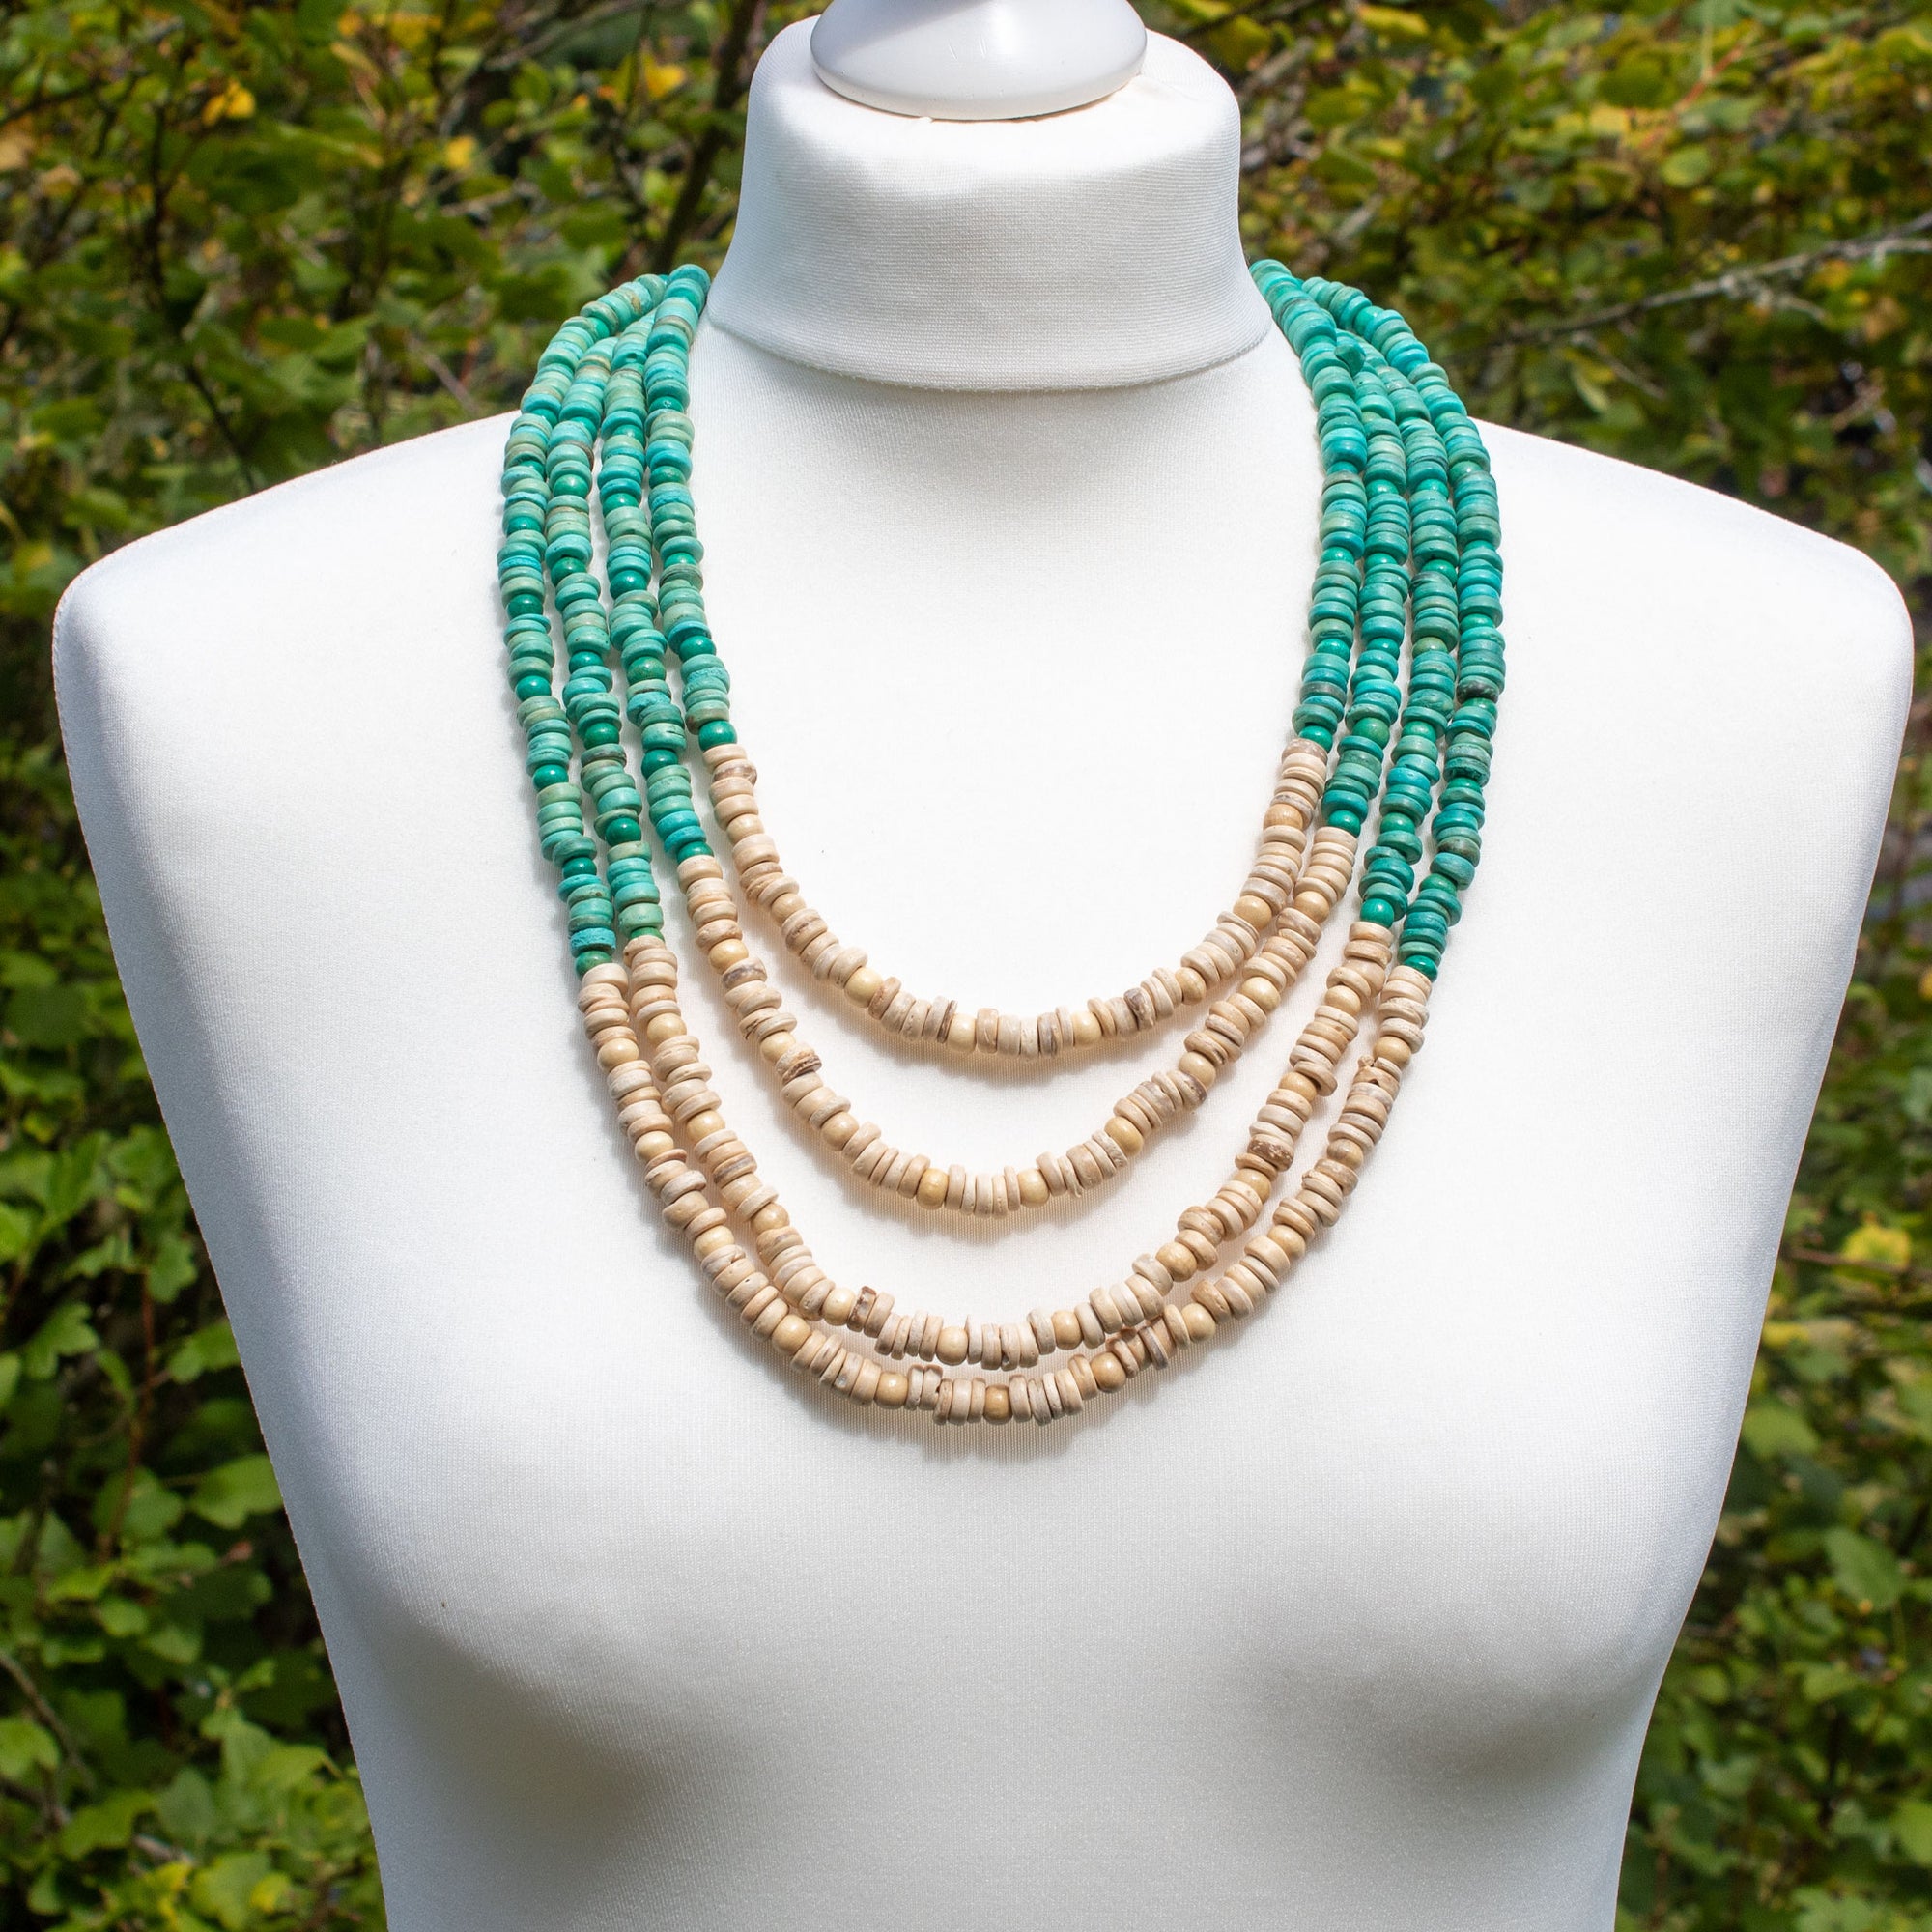 Cream & Turquoise Wooden Bead Multi-strand Necklace | Necklace - The Naughty Shrew